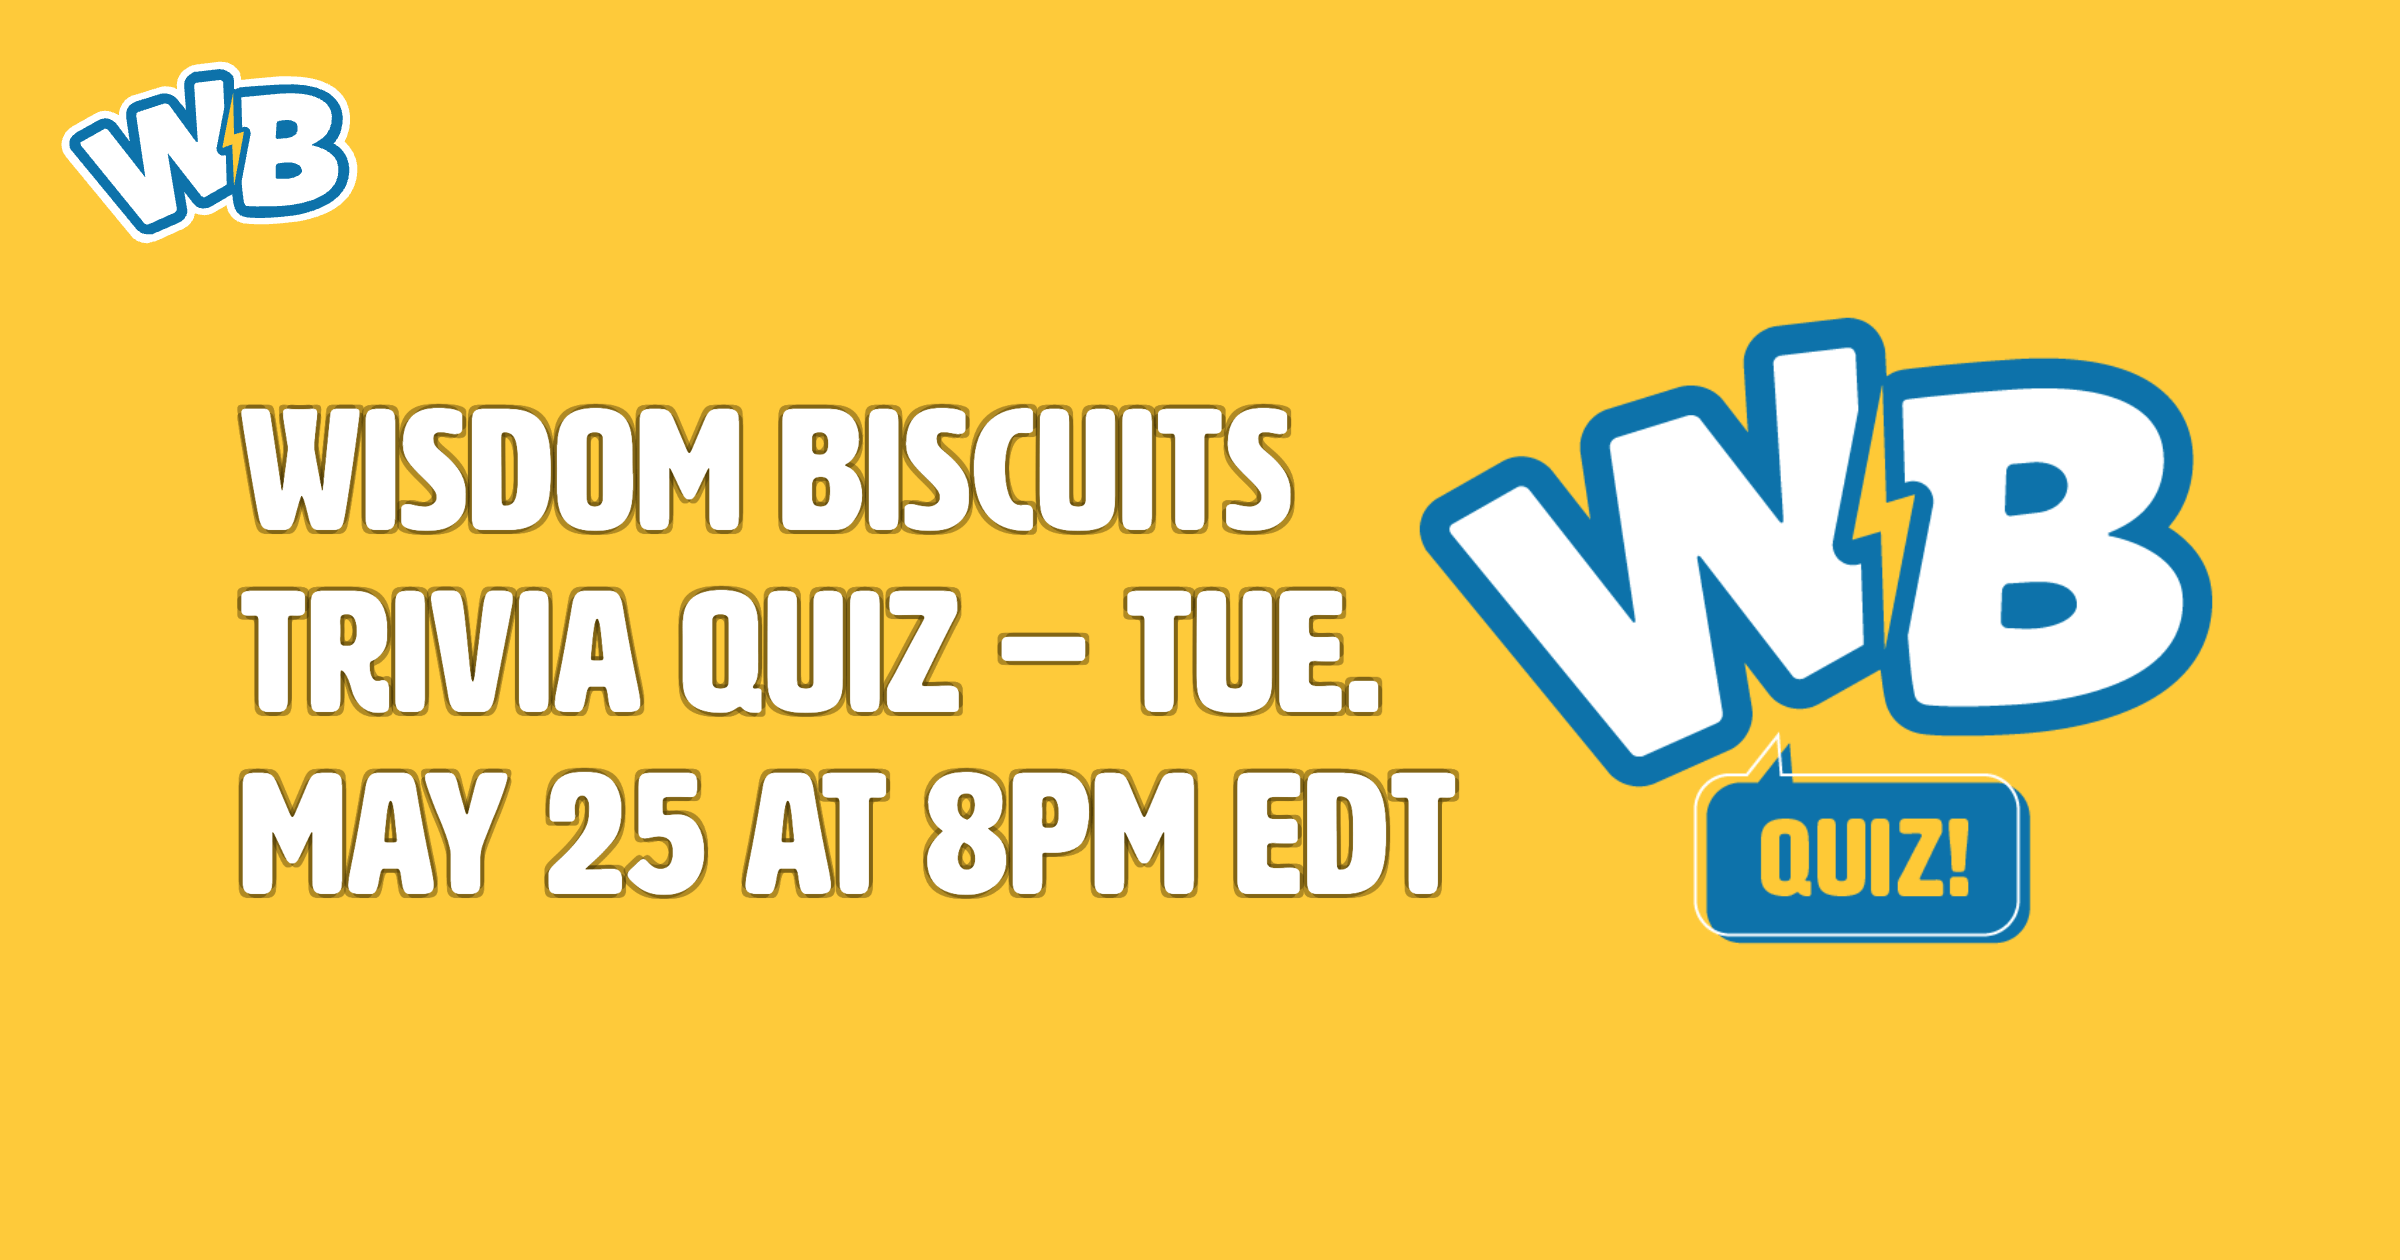 Wisdom Biscuits Trivia Quiz - Tue. May 25 at 8pm EDT